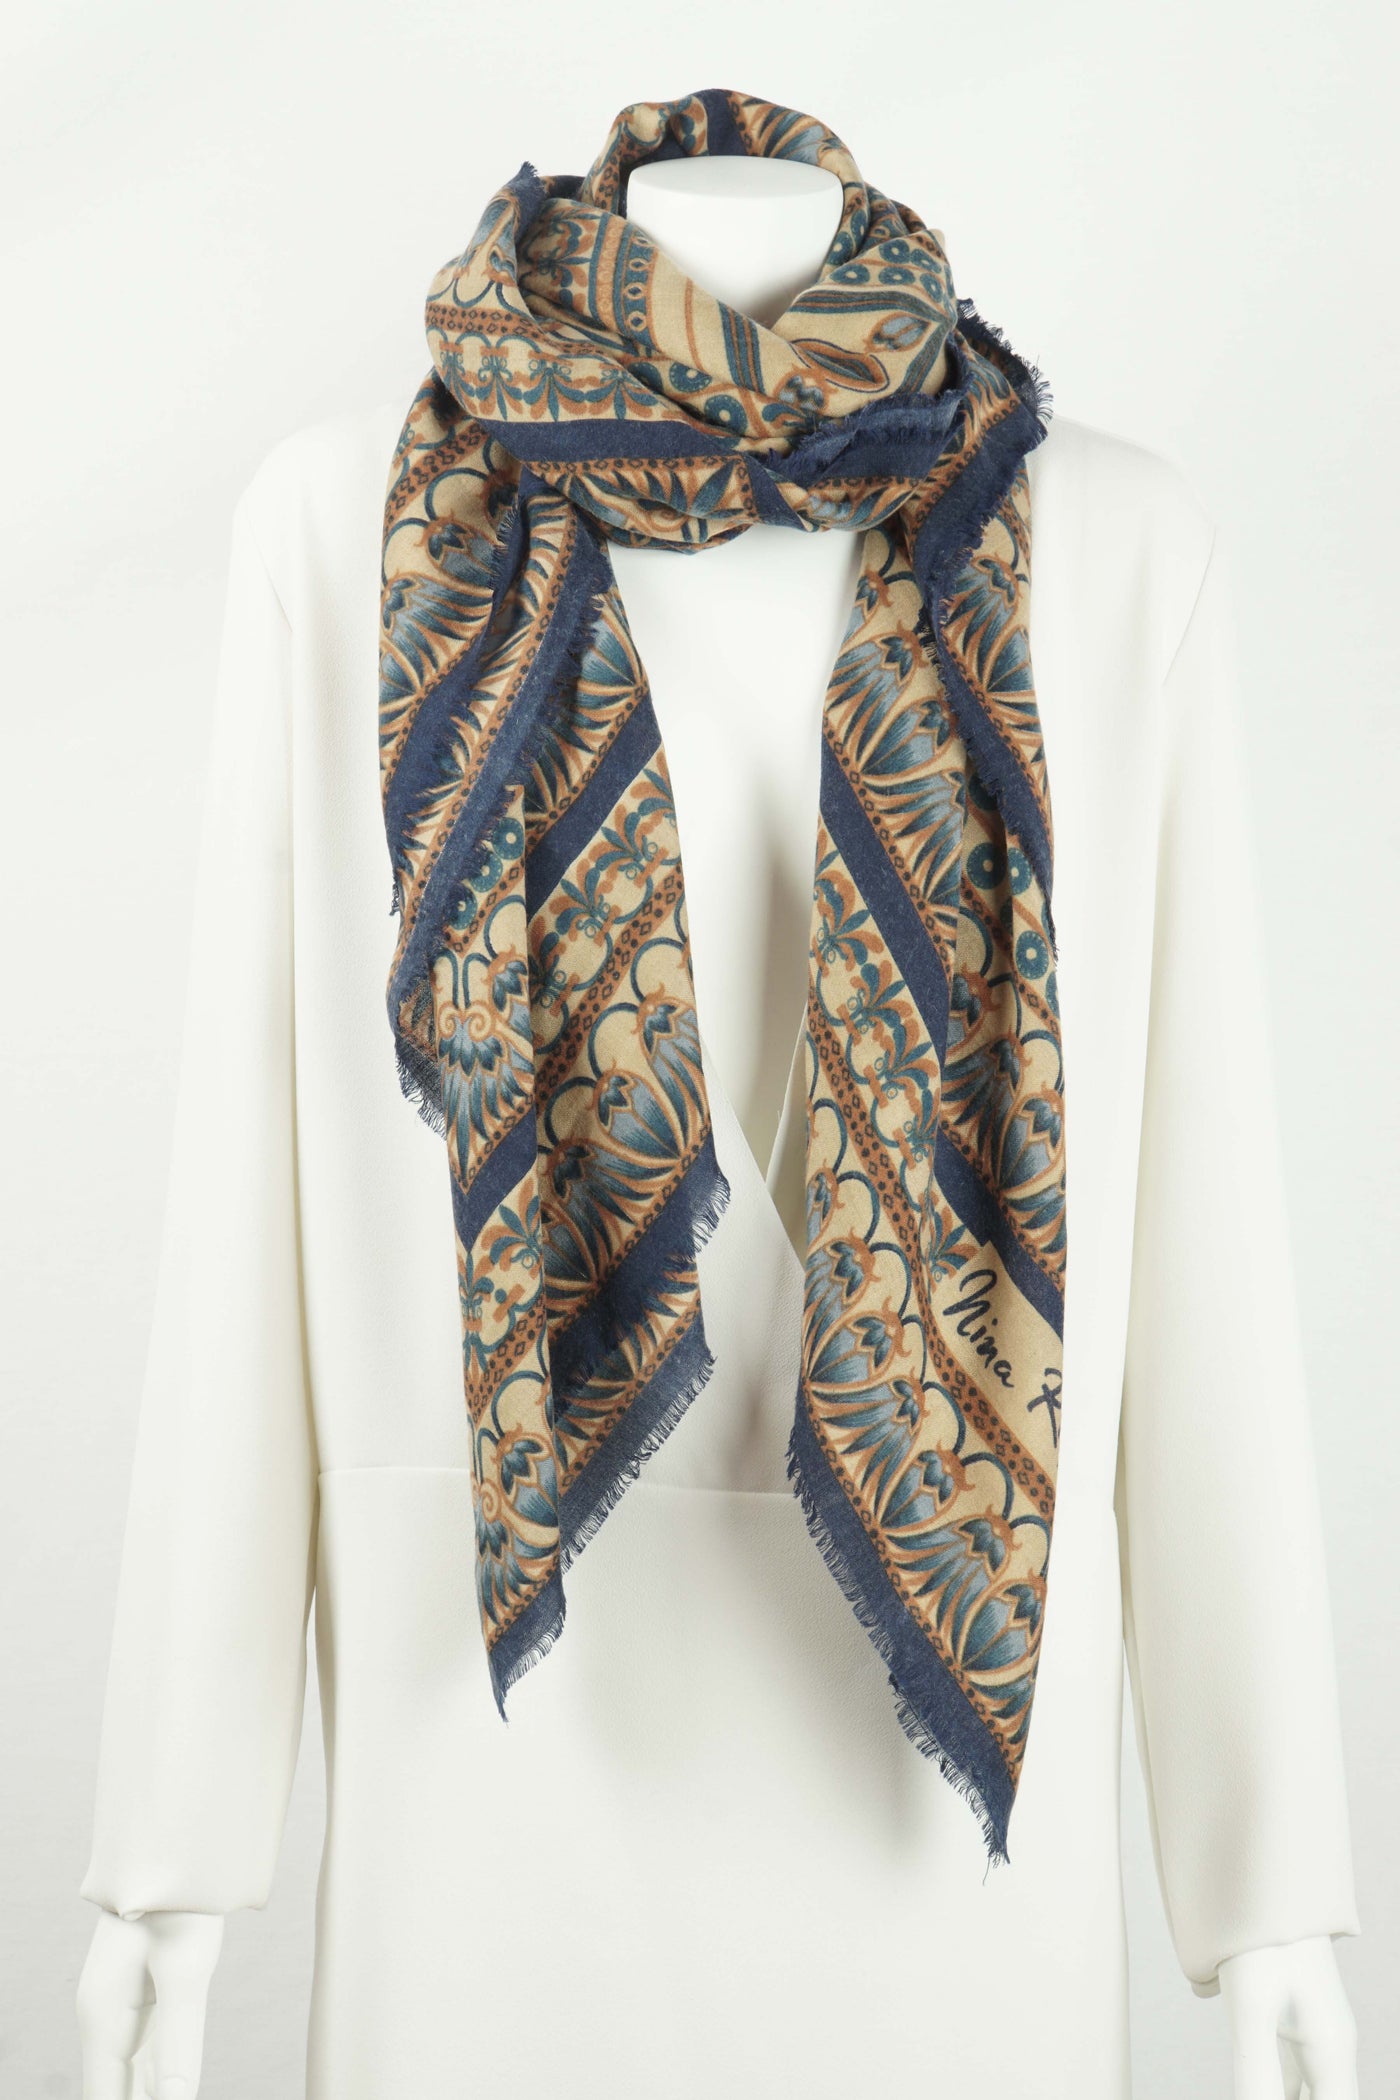 Cashmere and silk shawl in blues